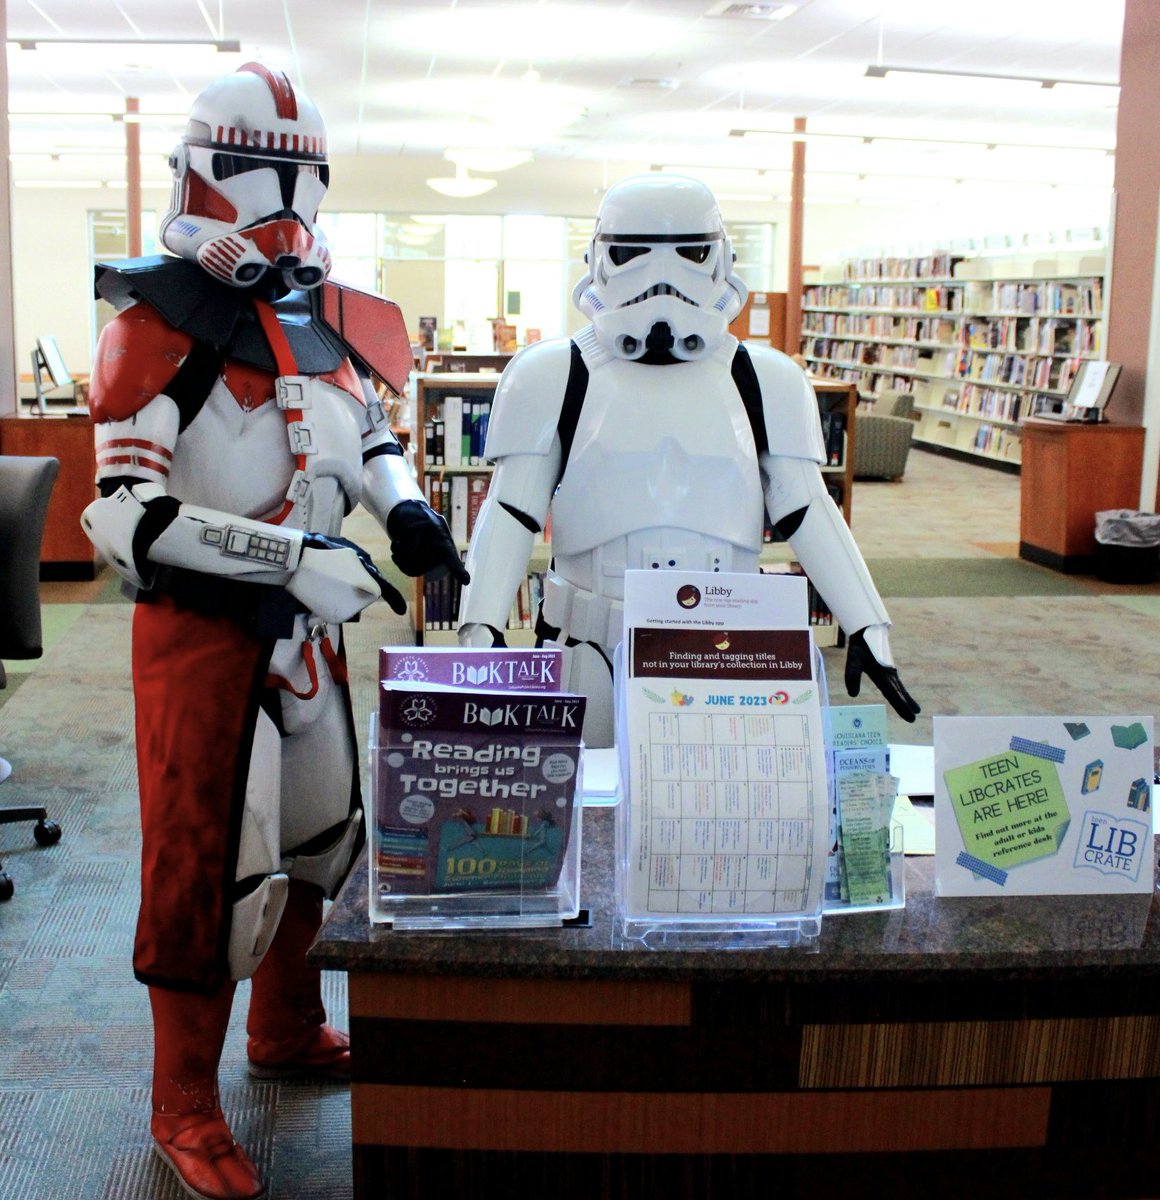 Got deployed to the local library today to help with the summer reading program. Was great to see so many kids signing up for library cards! #501st  #badguysdoinggood